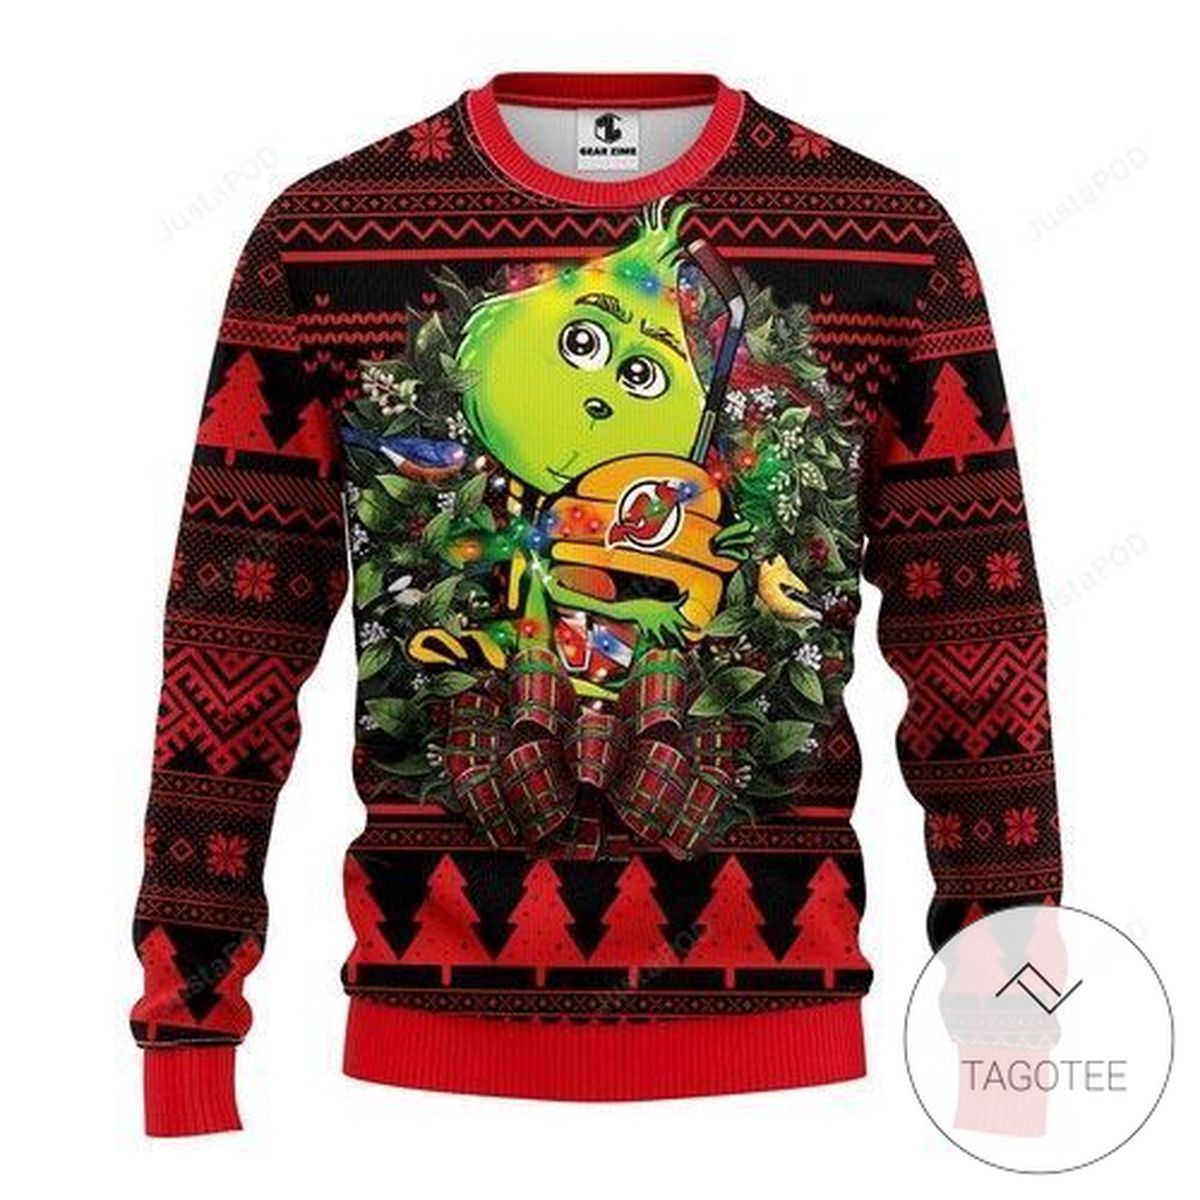 Nhl New Jersey Devils Grinch Hug Sweatshirt Knitted Ugly Christmas Sweater